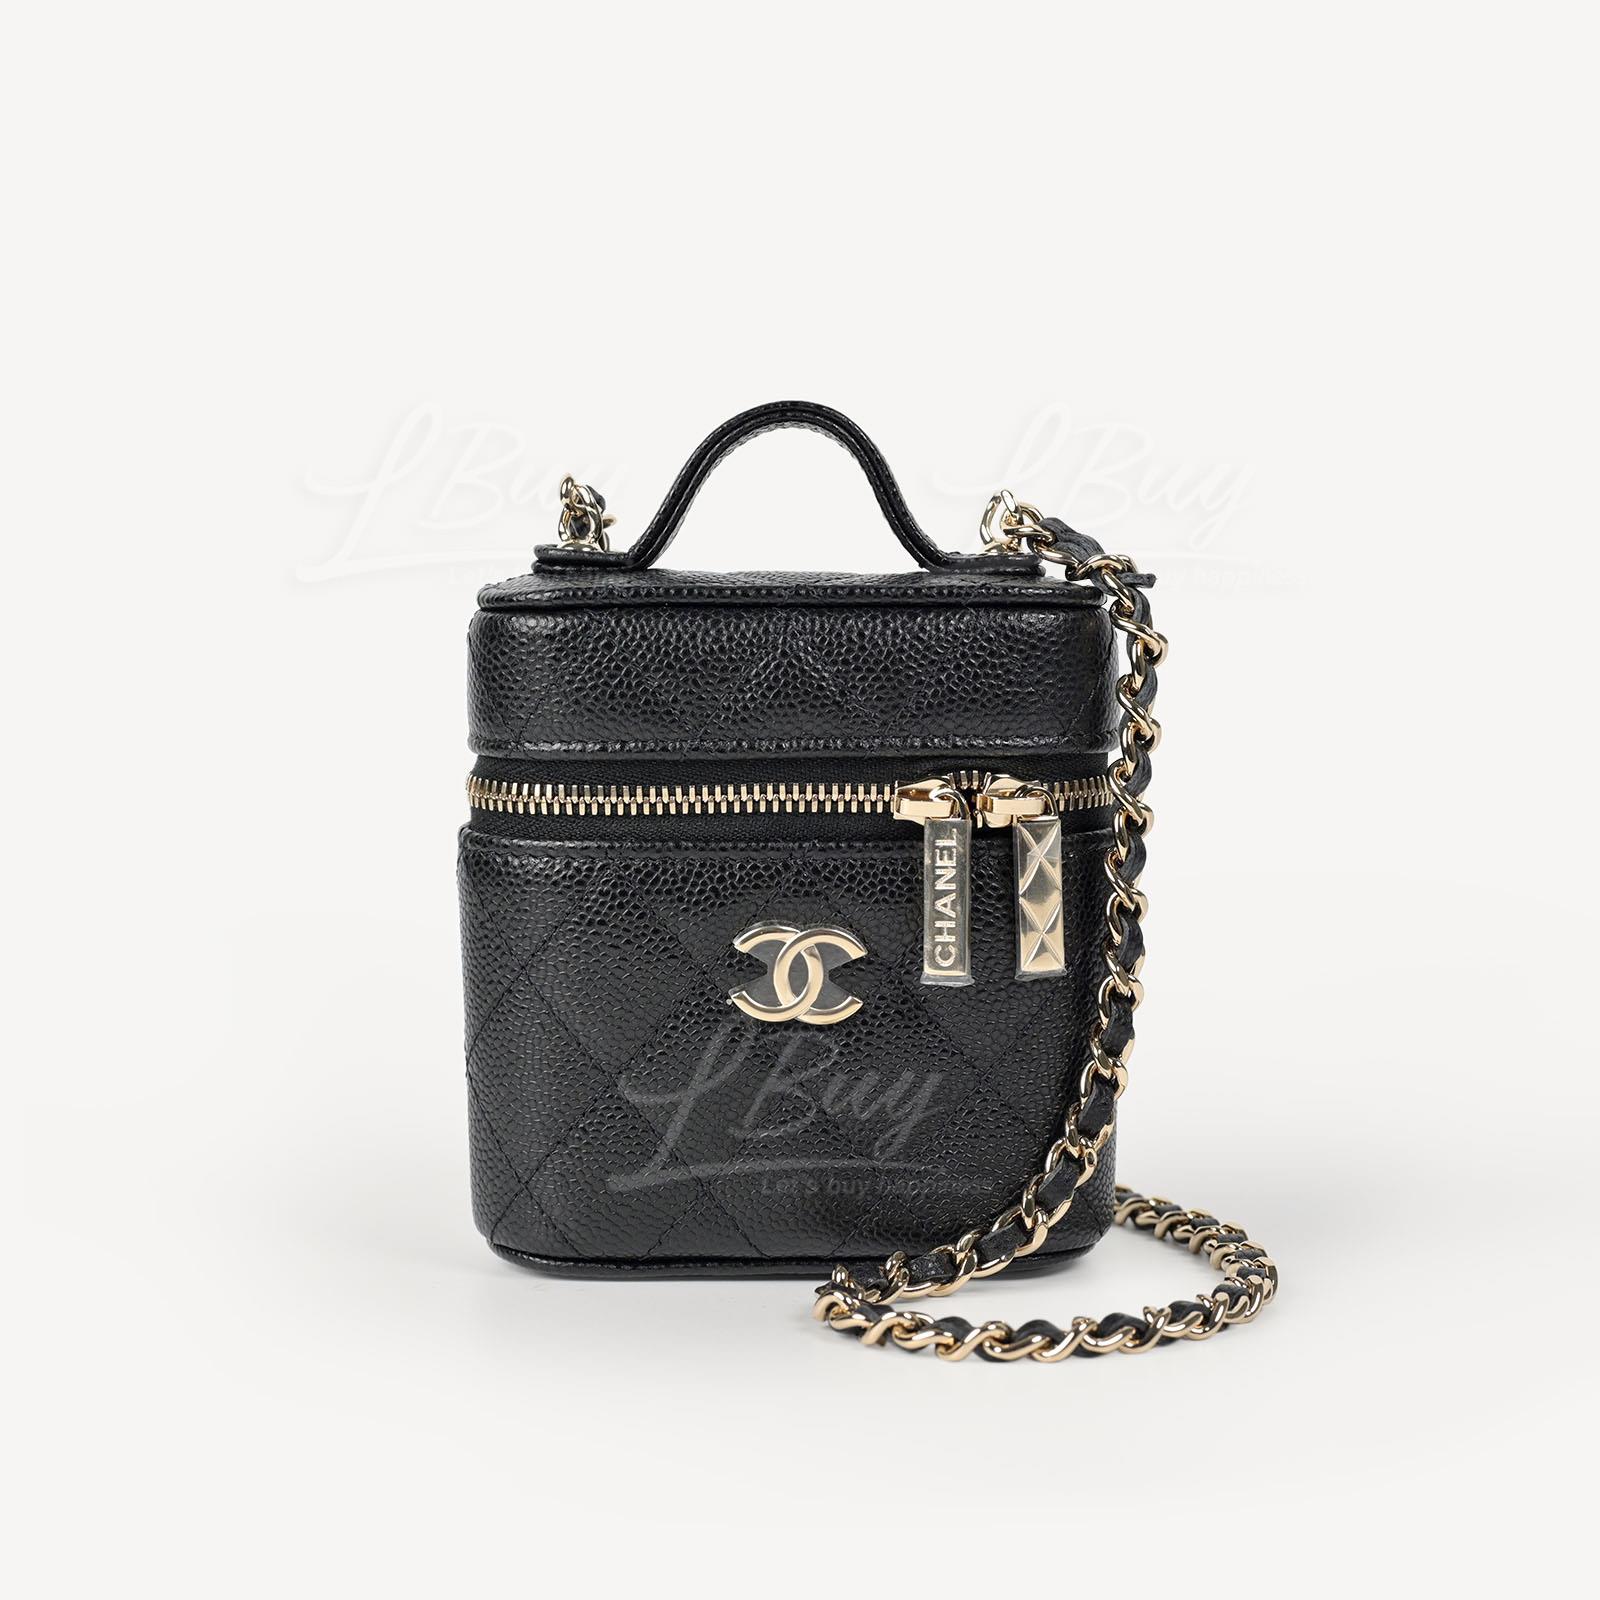 Chanel Small Black Vanity Case with Chain AP2503